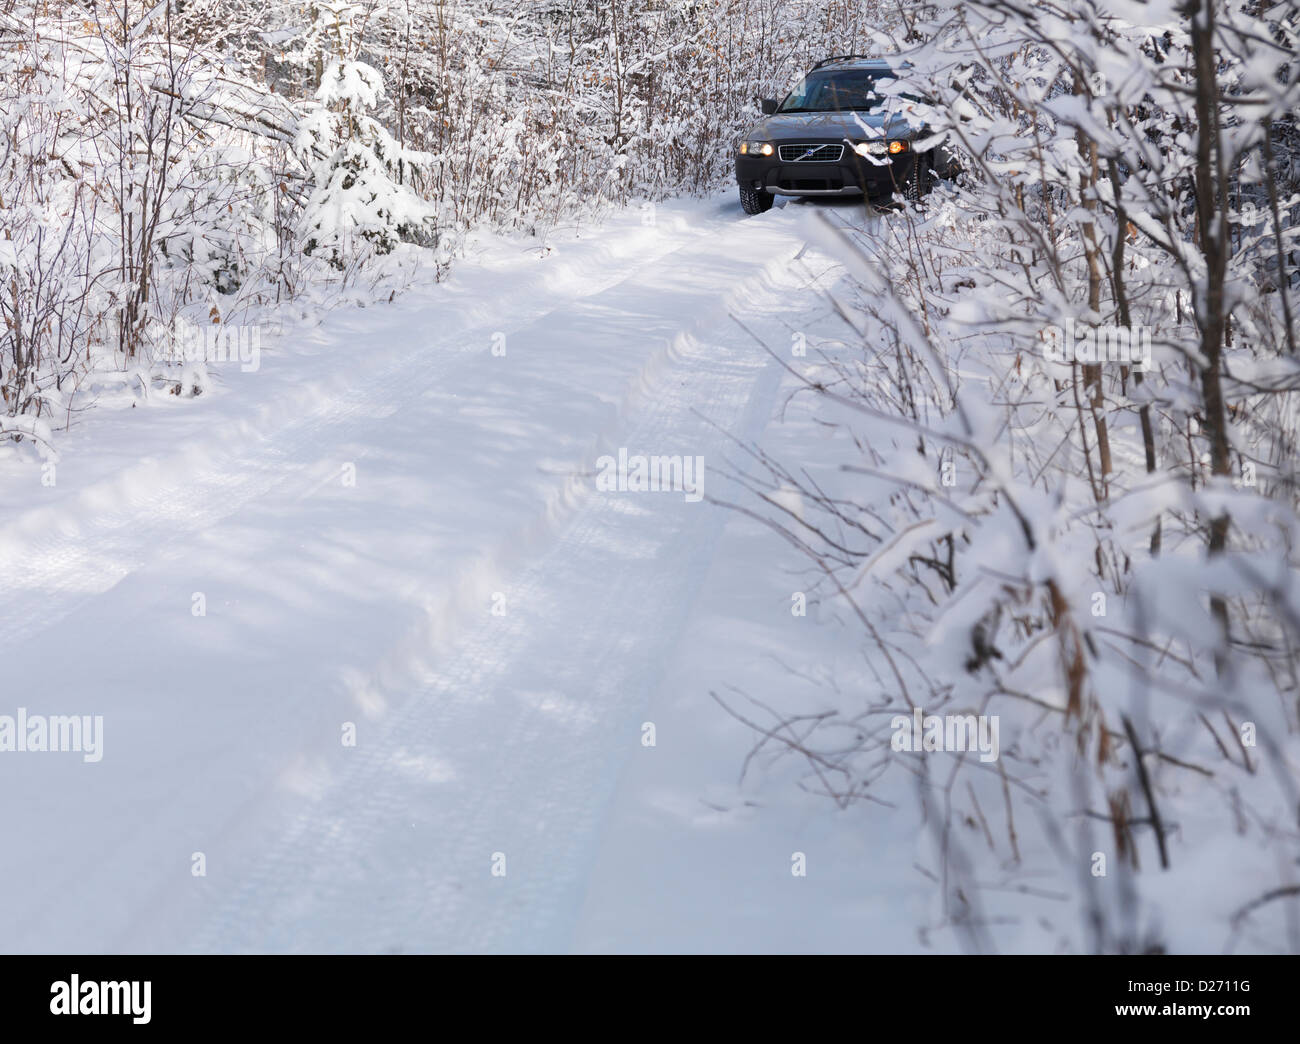 Volvo XC70 car on a snow covered unpaved country road, winter nature scenic. Stock Photo